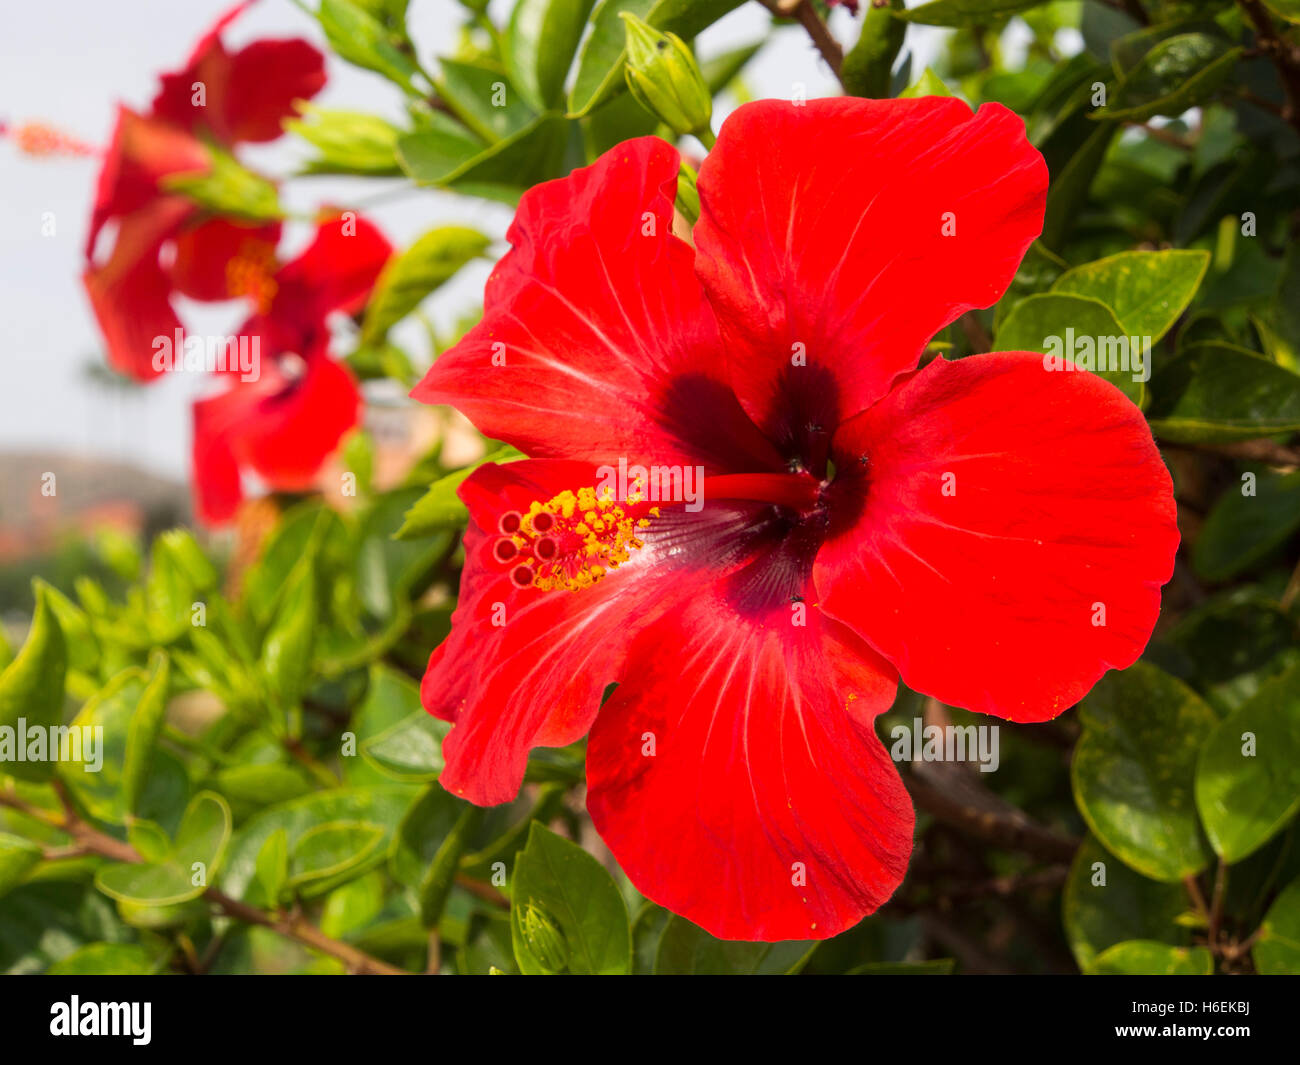 Red Hibiscus Flower in a garden. Mijas. Costa del Sol, Malaga province. Andalusia Spain. Europe Stock Photo